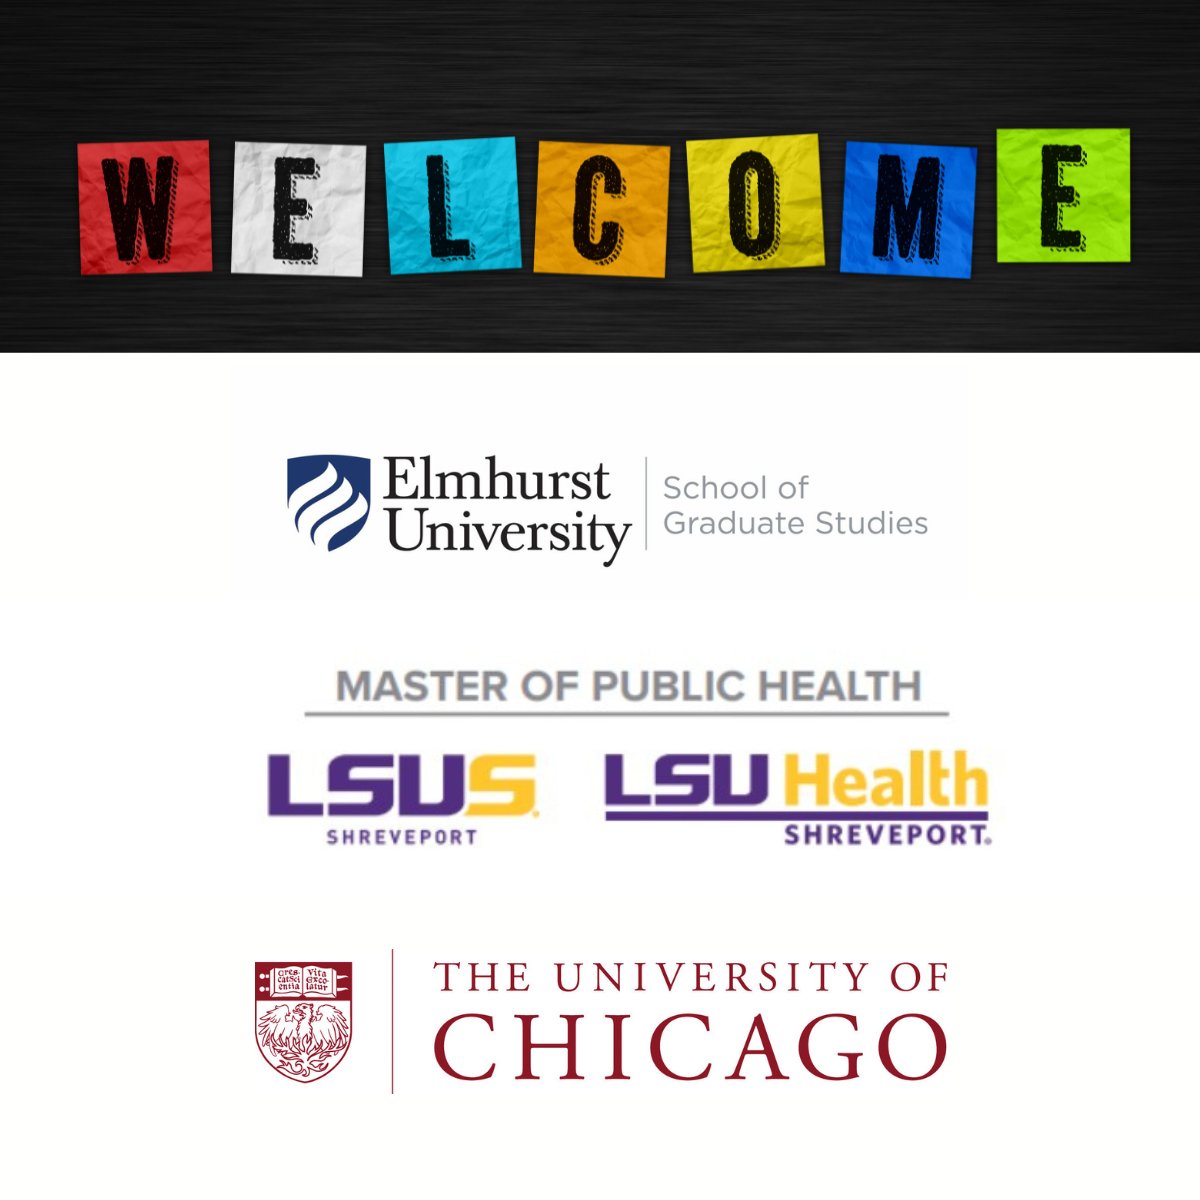 I am thrilled to announce three new members as part of the @ASPPHtweets network! Please welcome @elmhurst_u, @LSUHS, & @UChicago Master of Public Health Programs to the ASPPH family. We are so happy to have you!